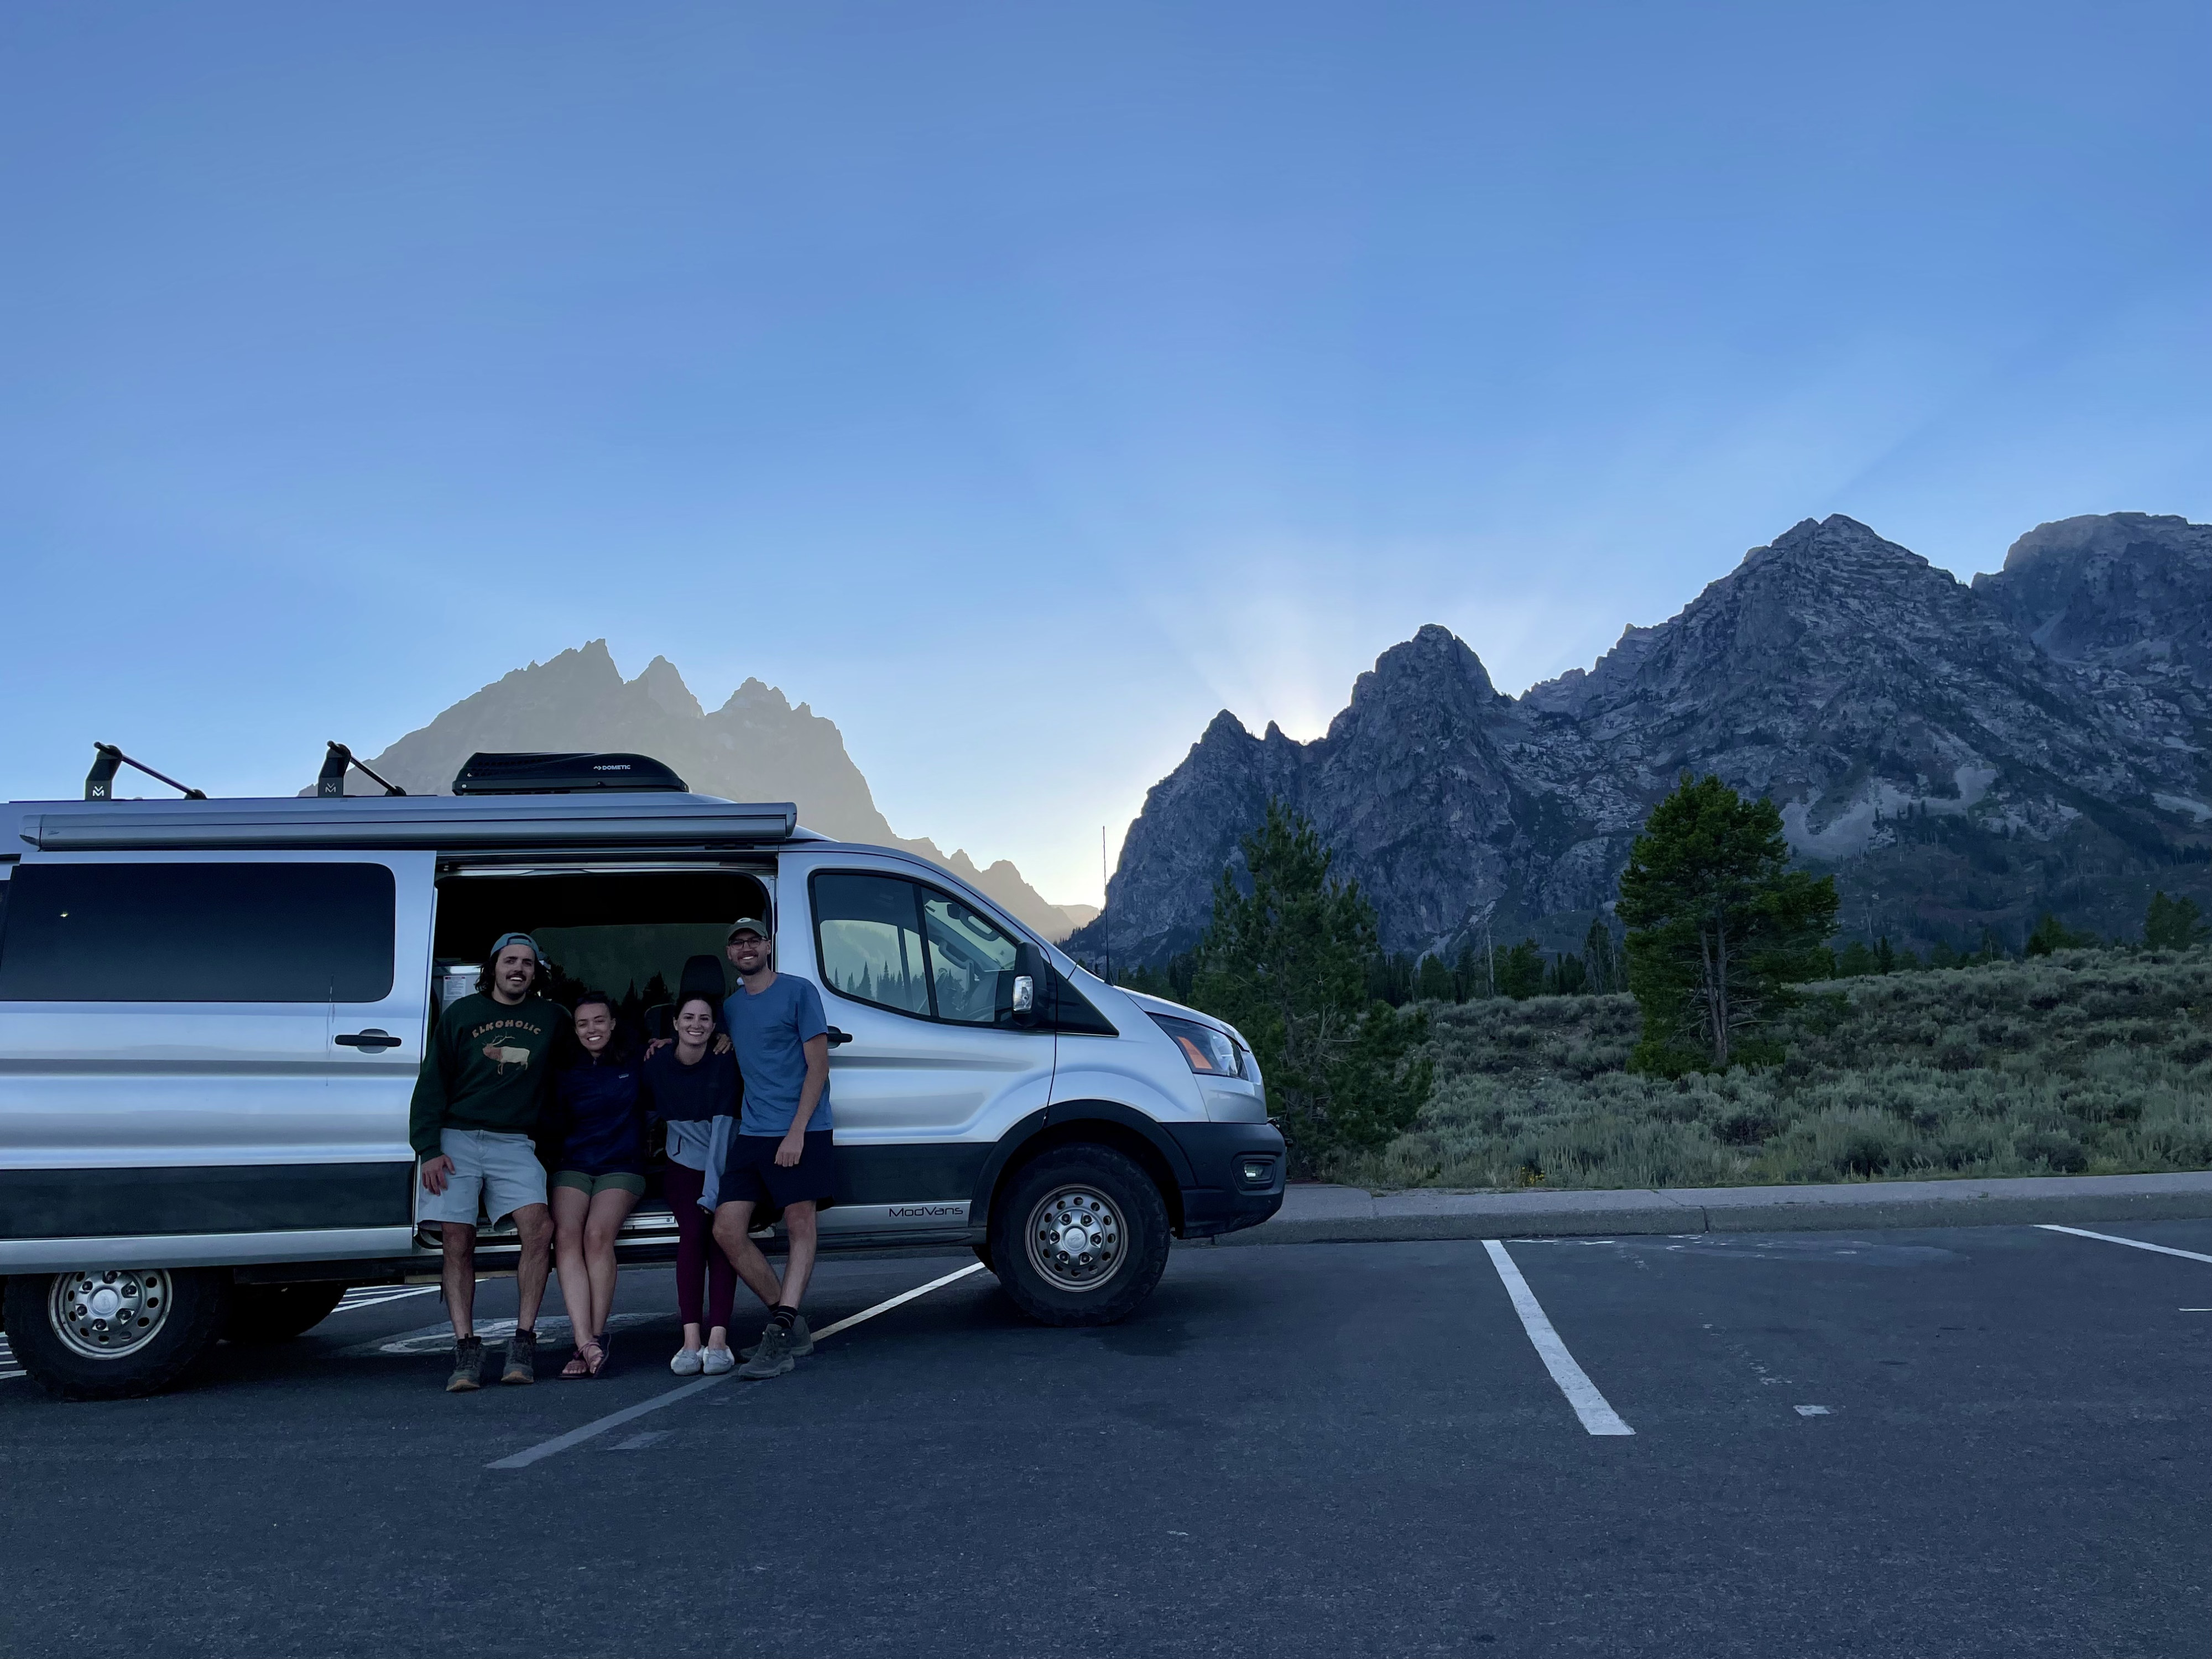 Ford Other van Rental in Ketchum, ID | Outdoorsy